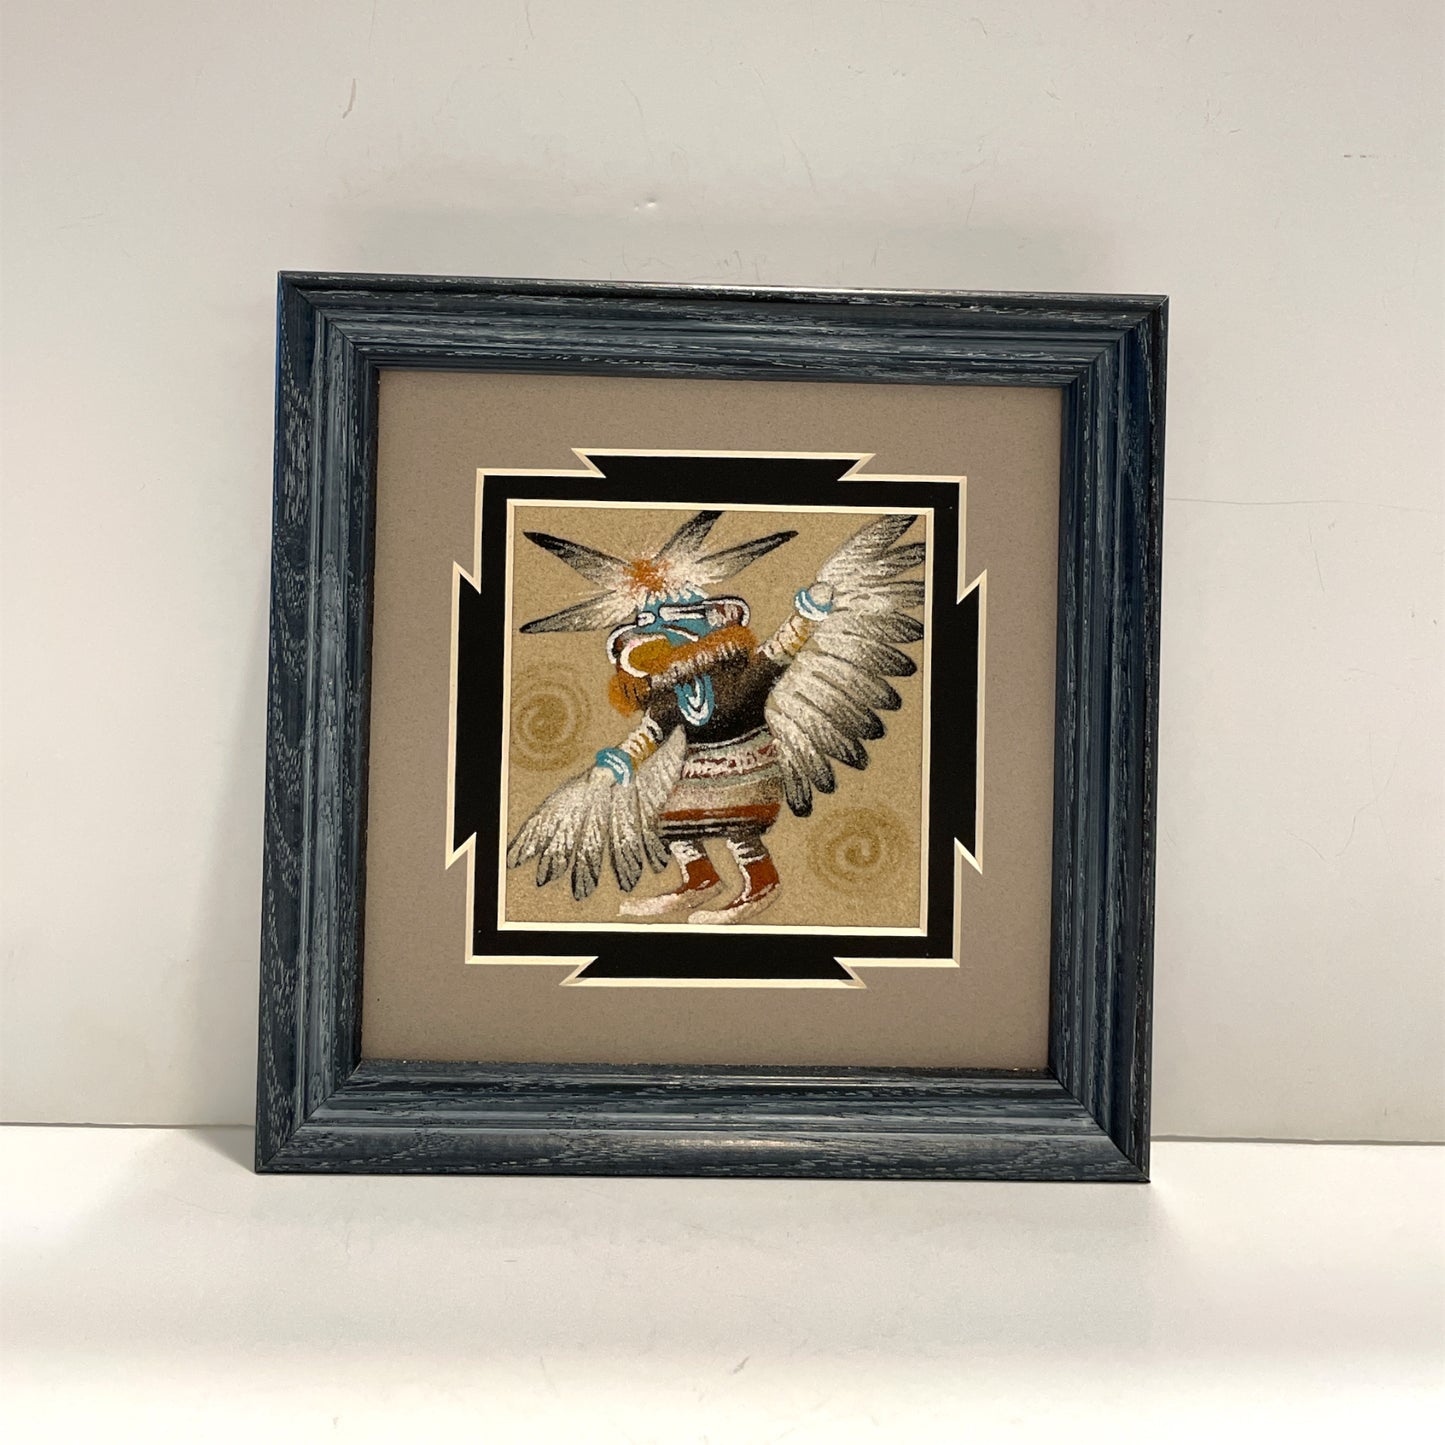 Navajo Sand Painting By Michael Watchman 7" x 7"  SK